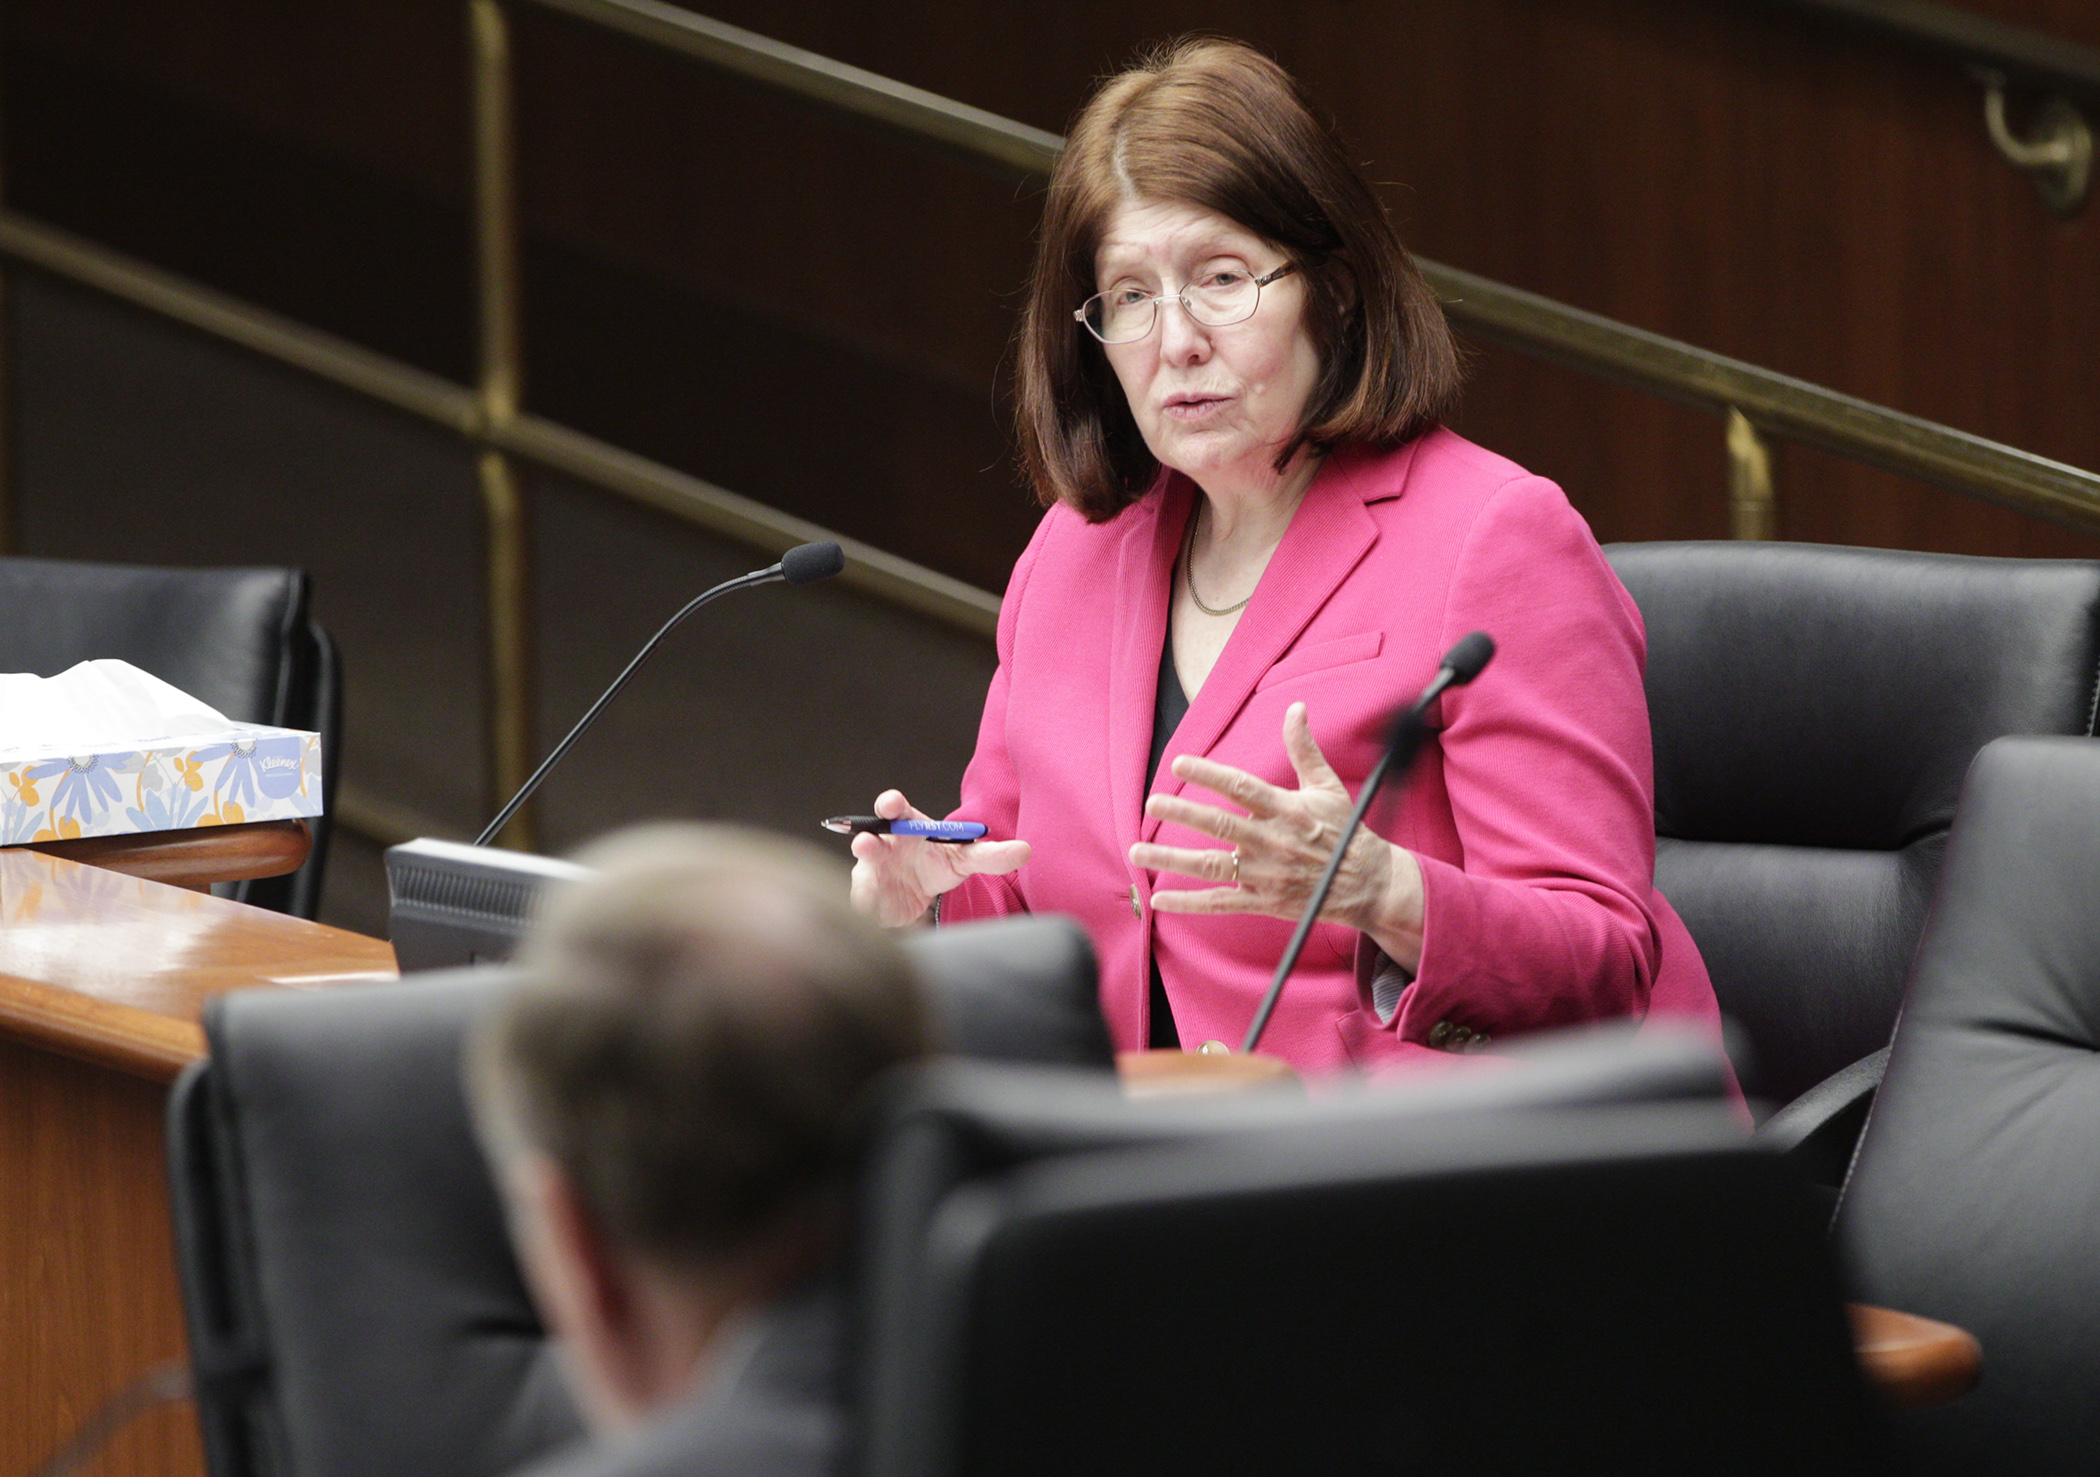 Rep. Tina Liebling answers questions from the House Government Operations Committee about HF4327, the bill she sponsors, that would authorize the governor to declare a peacetime public health emergency. Photo by Paul Battaglia